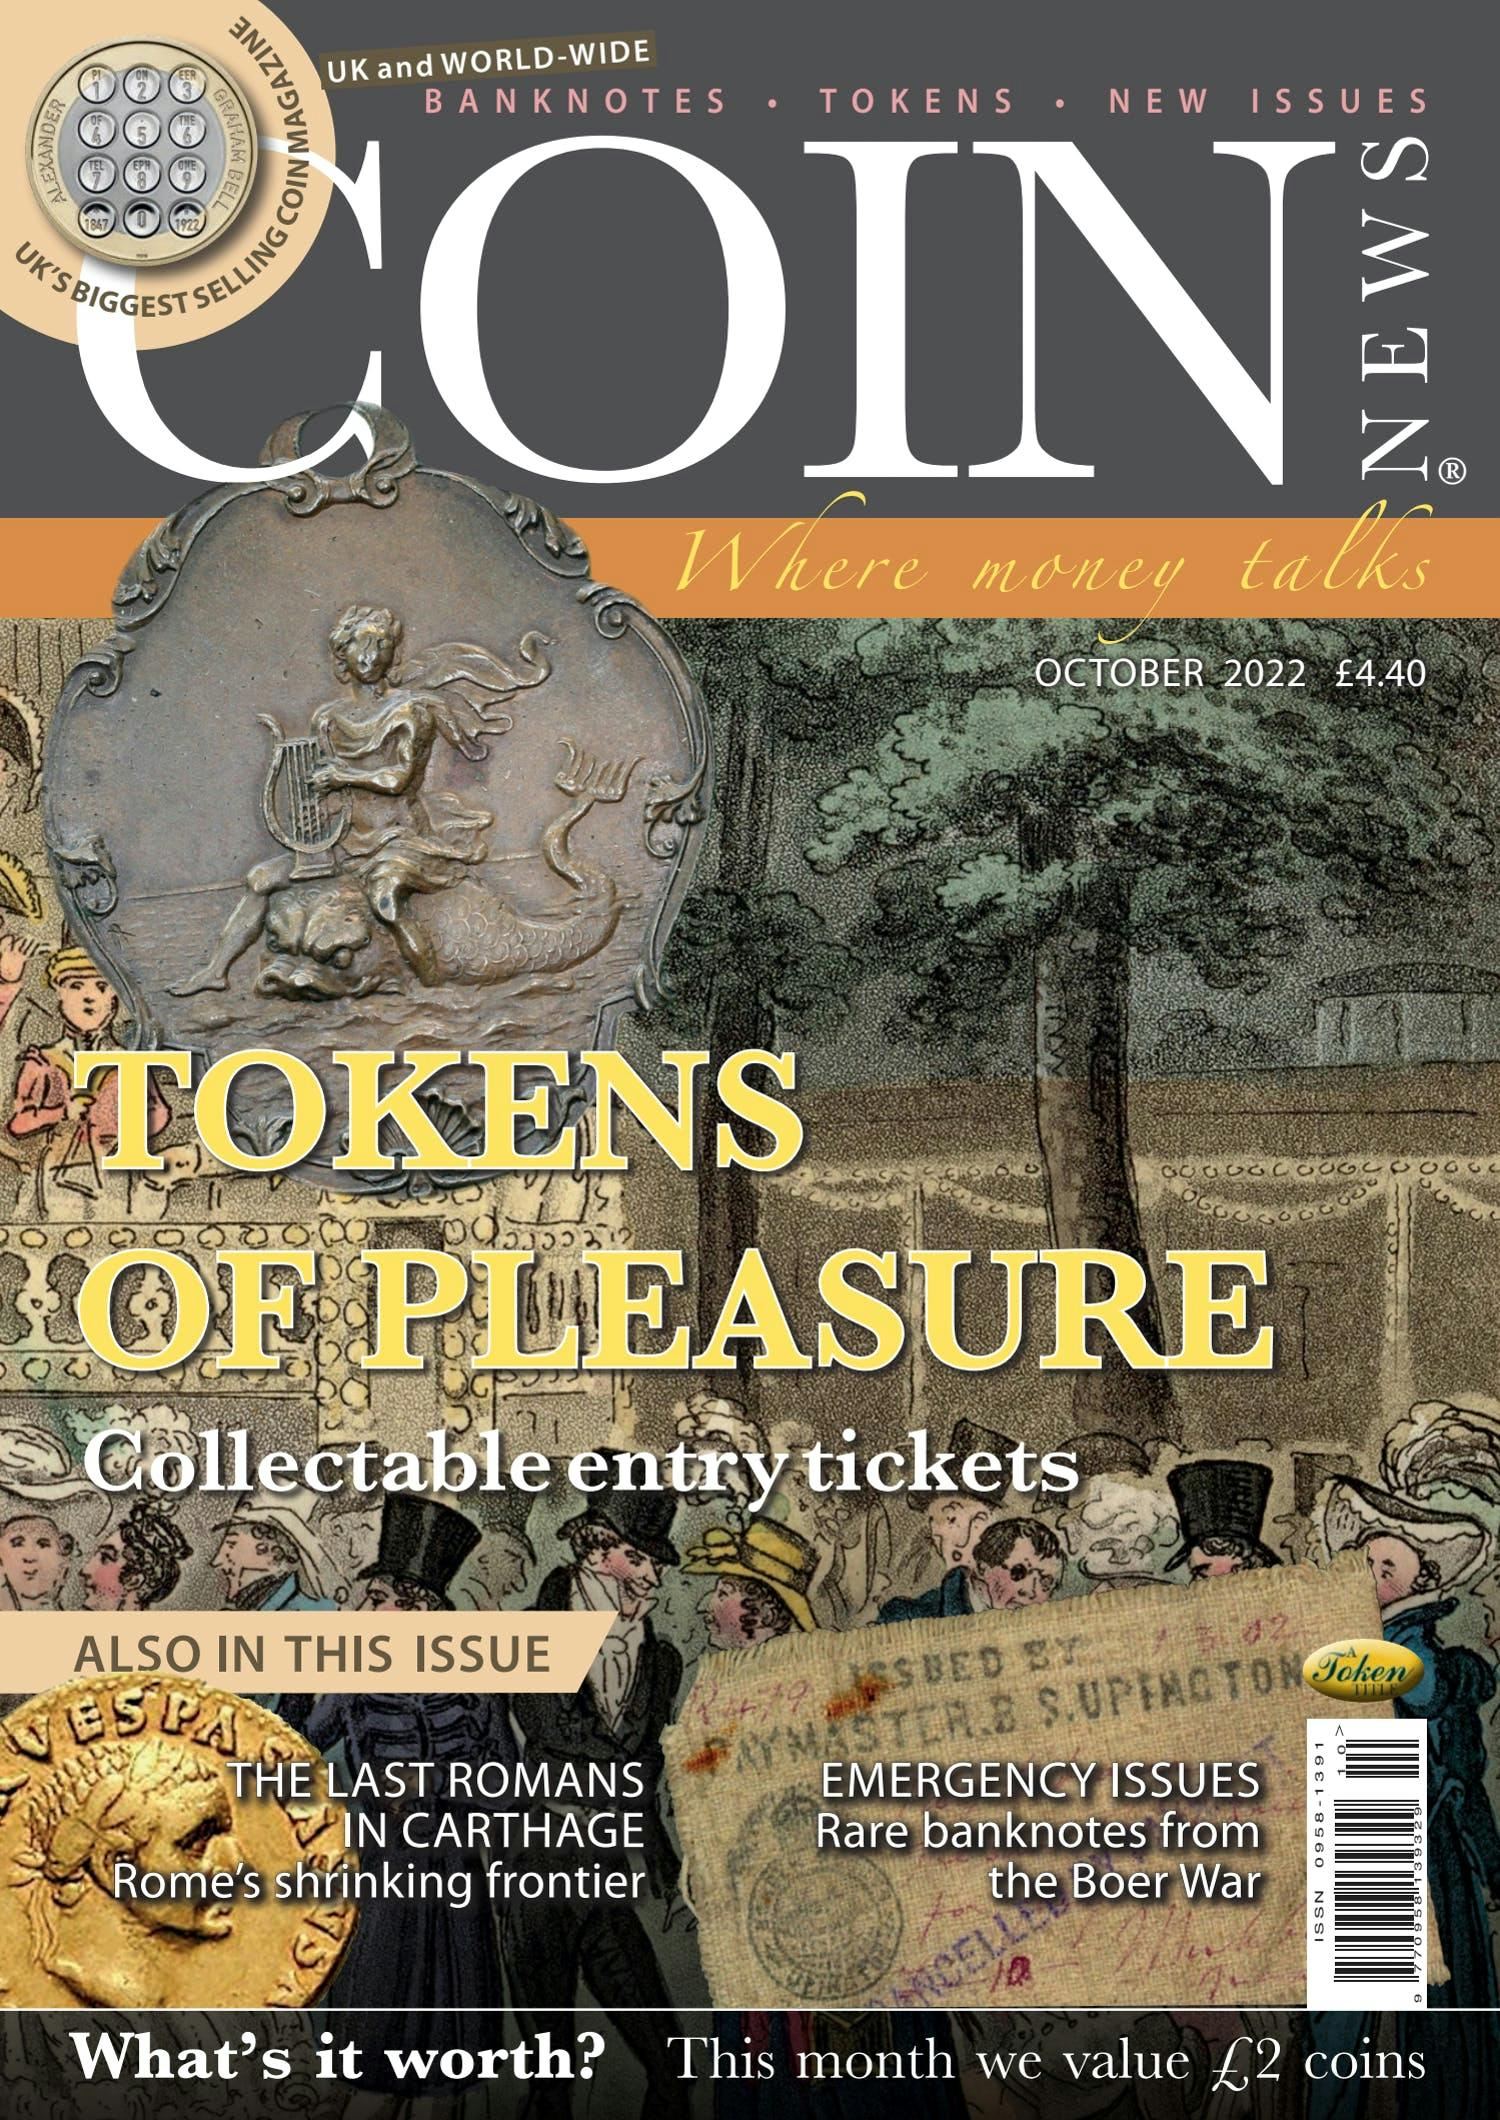 The front cover of Coin News, Volume 59, Number 10, October 2022